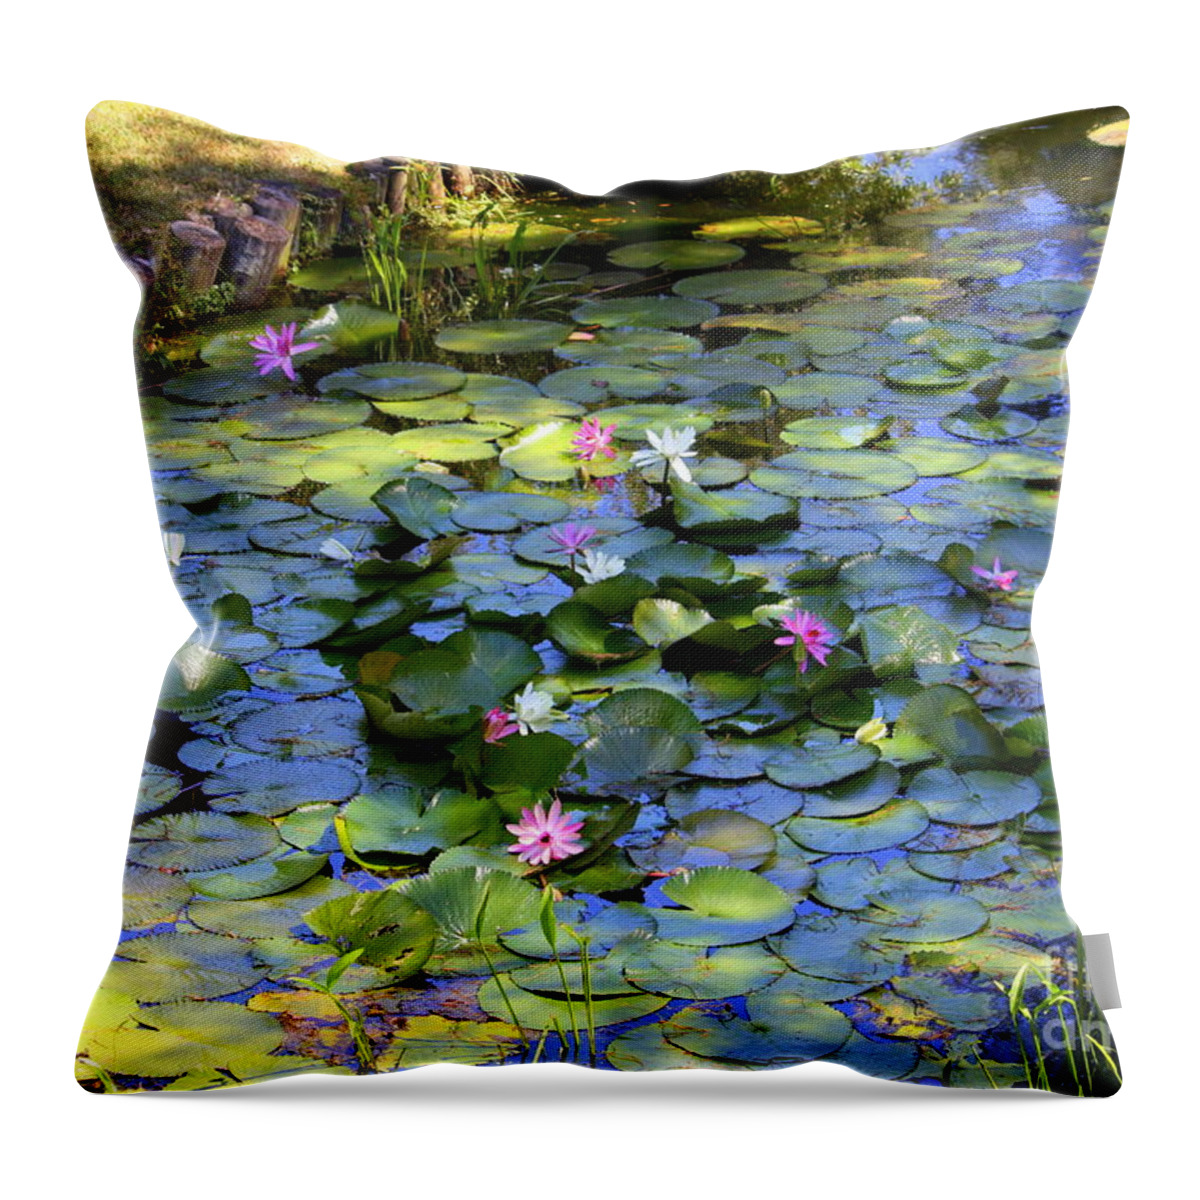 Lily Pond Throw Pillow featuring the photograph Southern Lily Pond by Carol Groenen